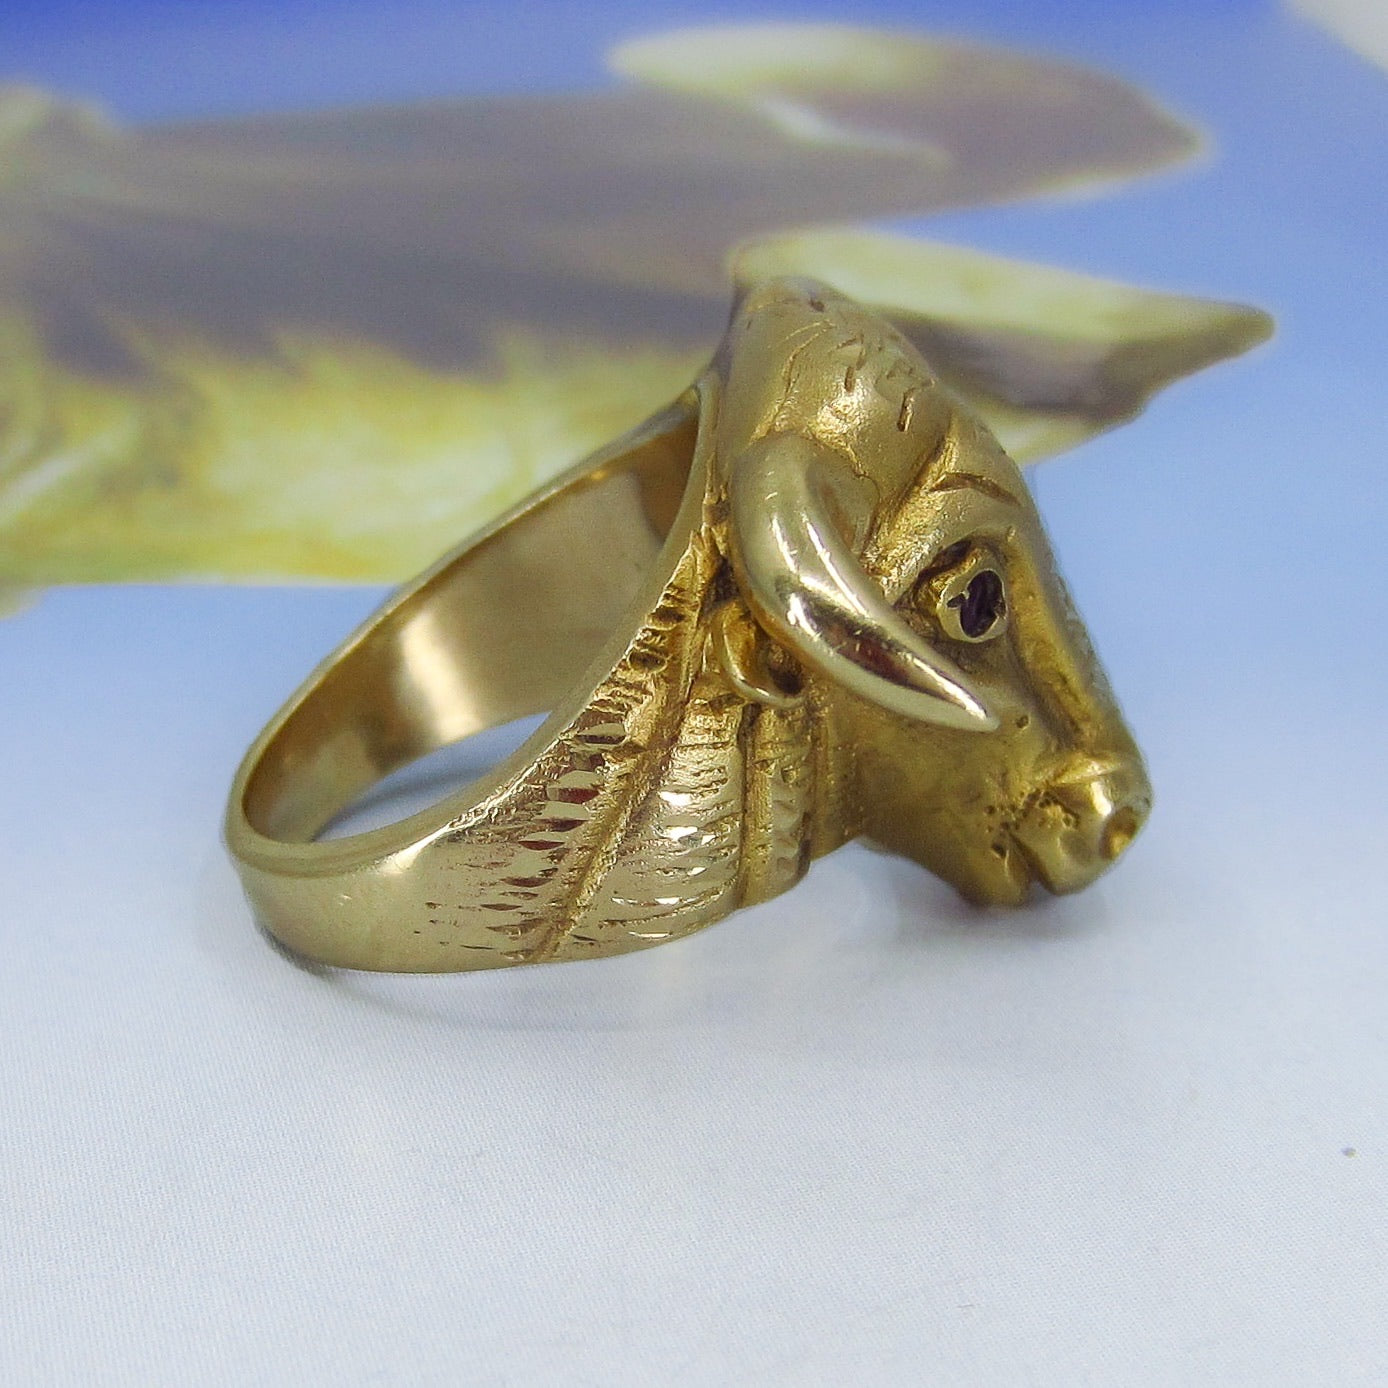 SOLD--Giant Bull Ring with Ruby Eyes 14k c. 1960